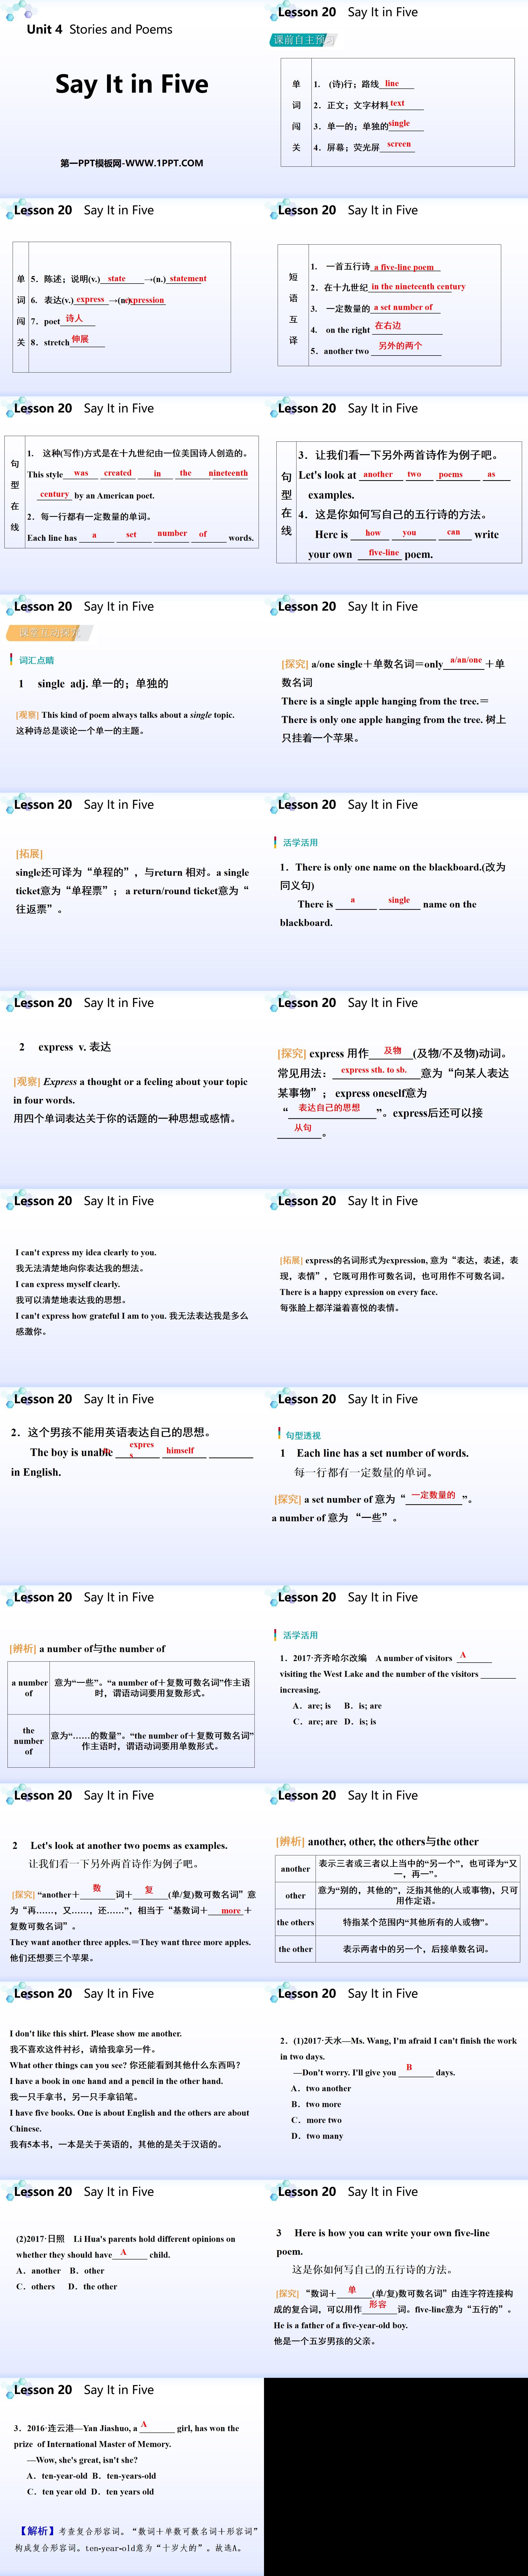 《Say It in Five》Stories and Poems PPT免费课件
（2）